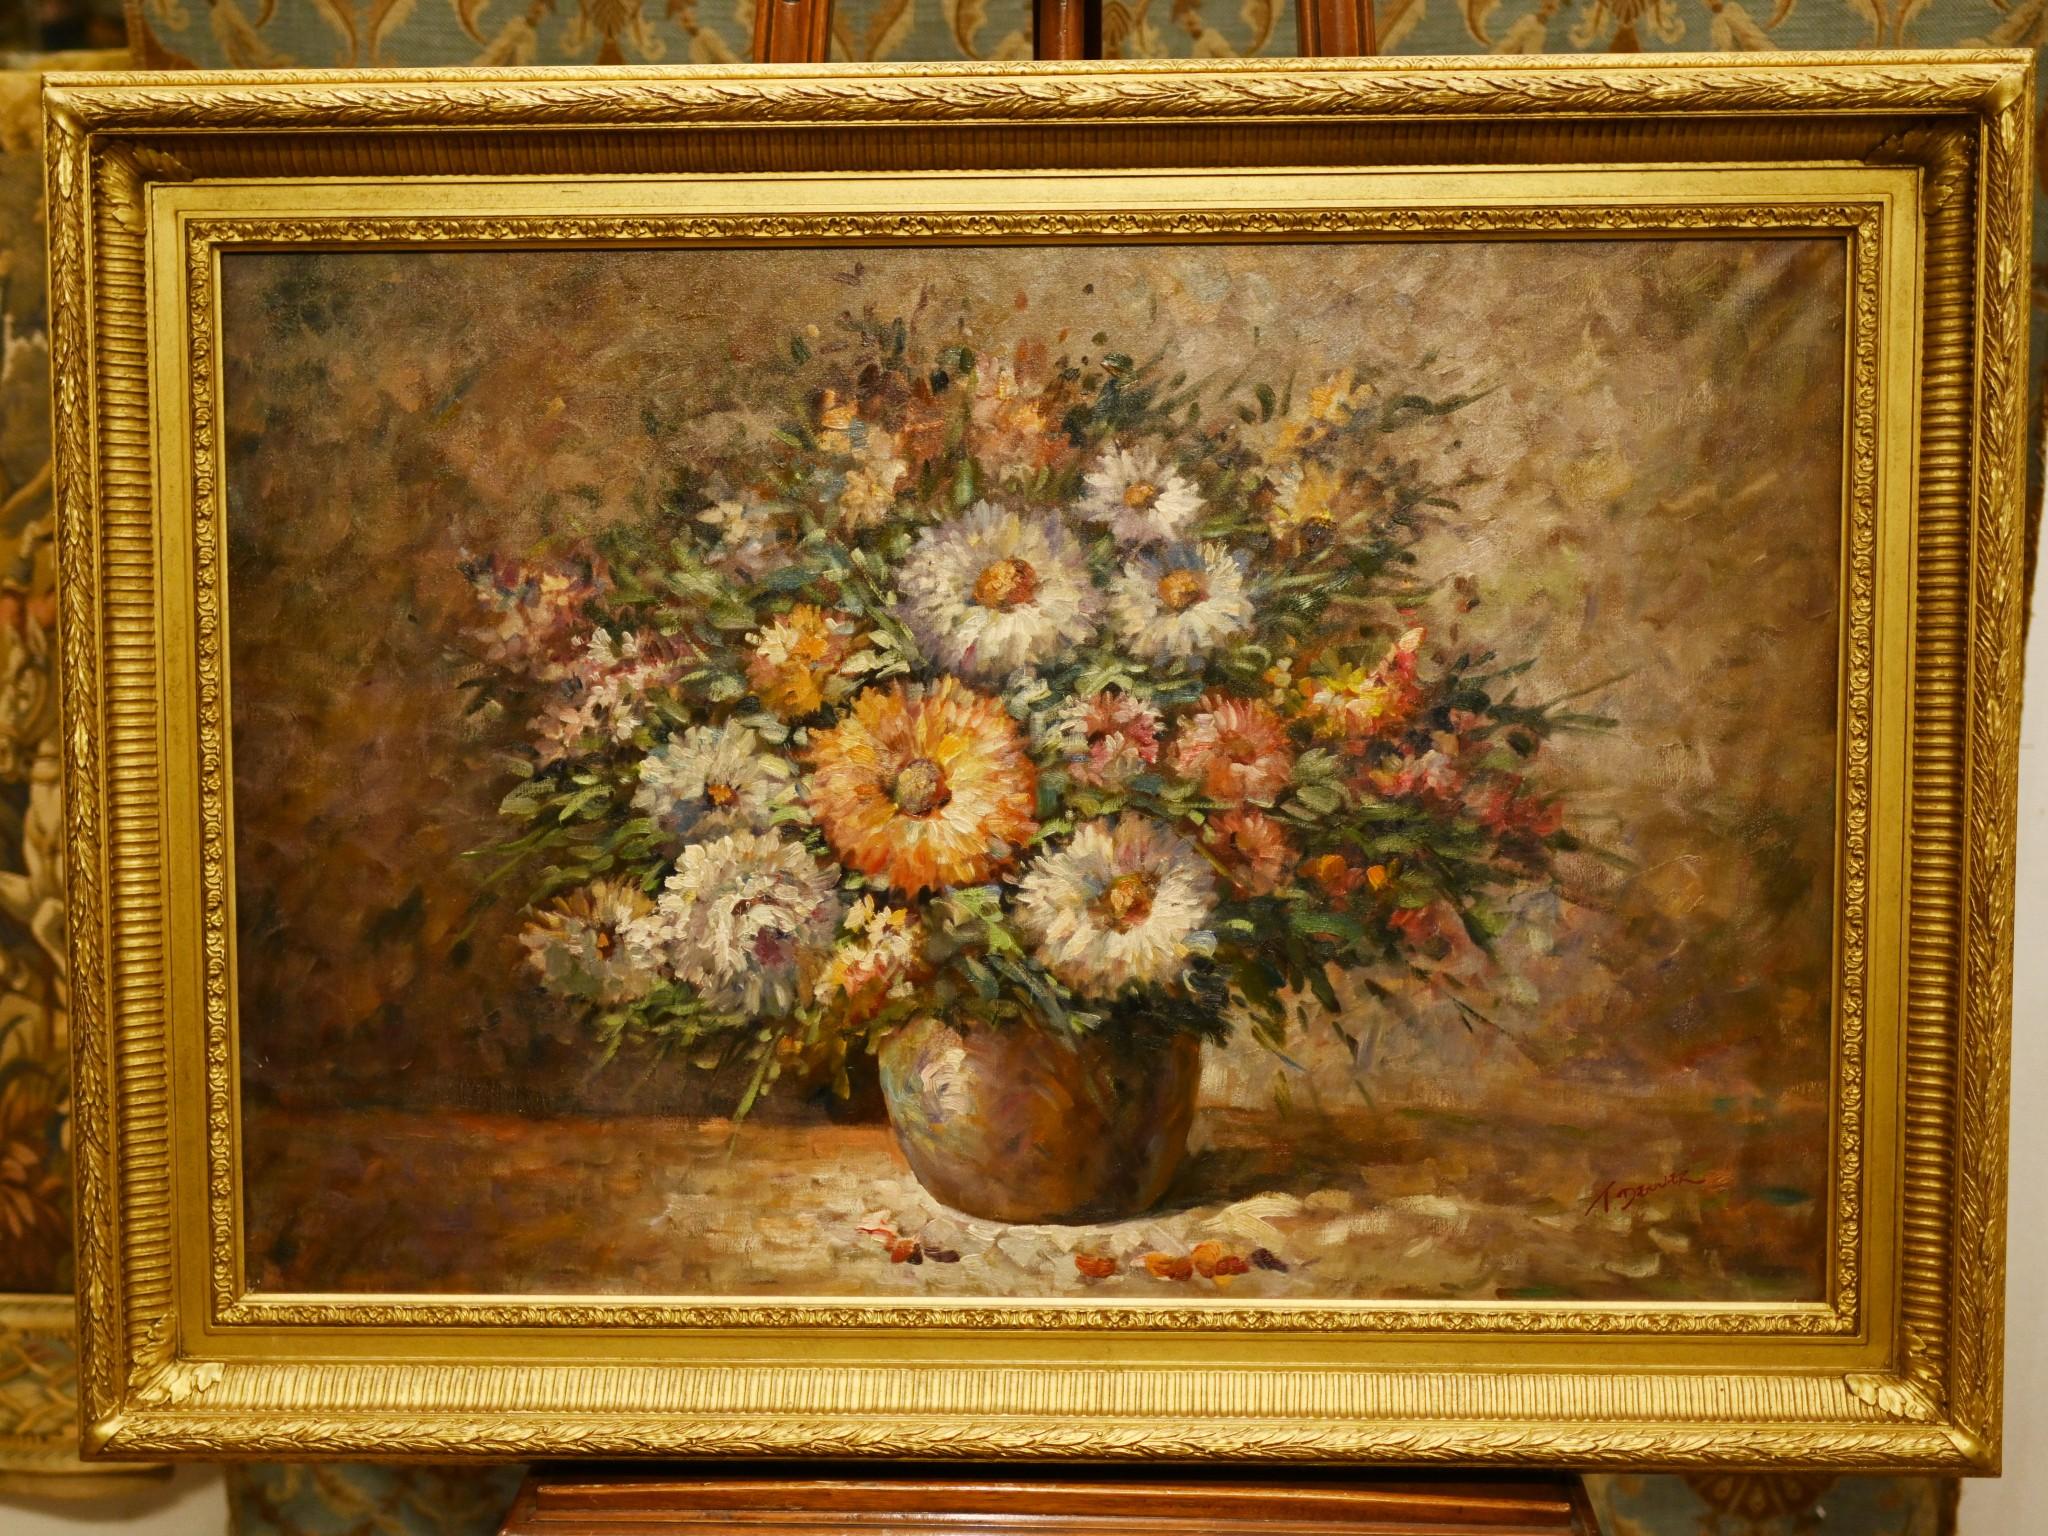 Characterful vintage American still life oil painting of a floral arrangement
Style is quite impressionist with the broad brushstroked and expressionism
Piece is signed Denver in bottom right corner - please see close up photo
Good size at almost